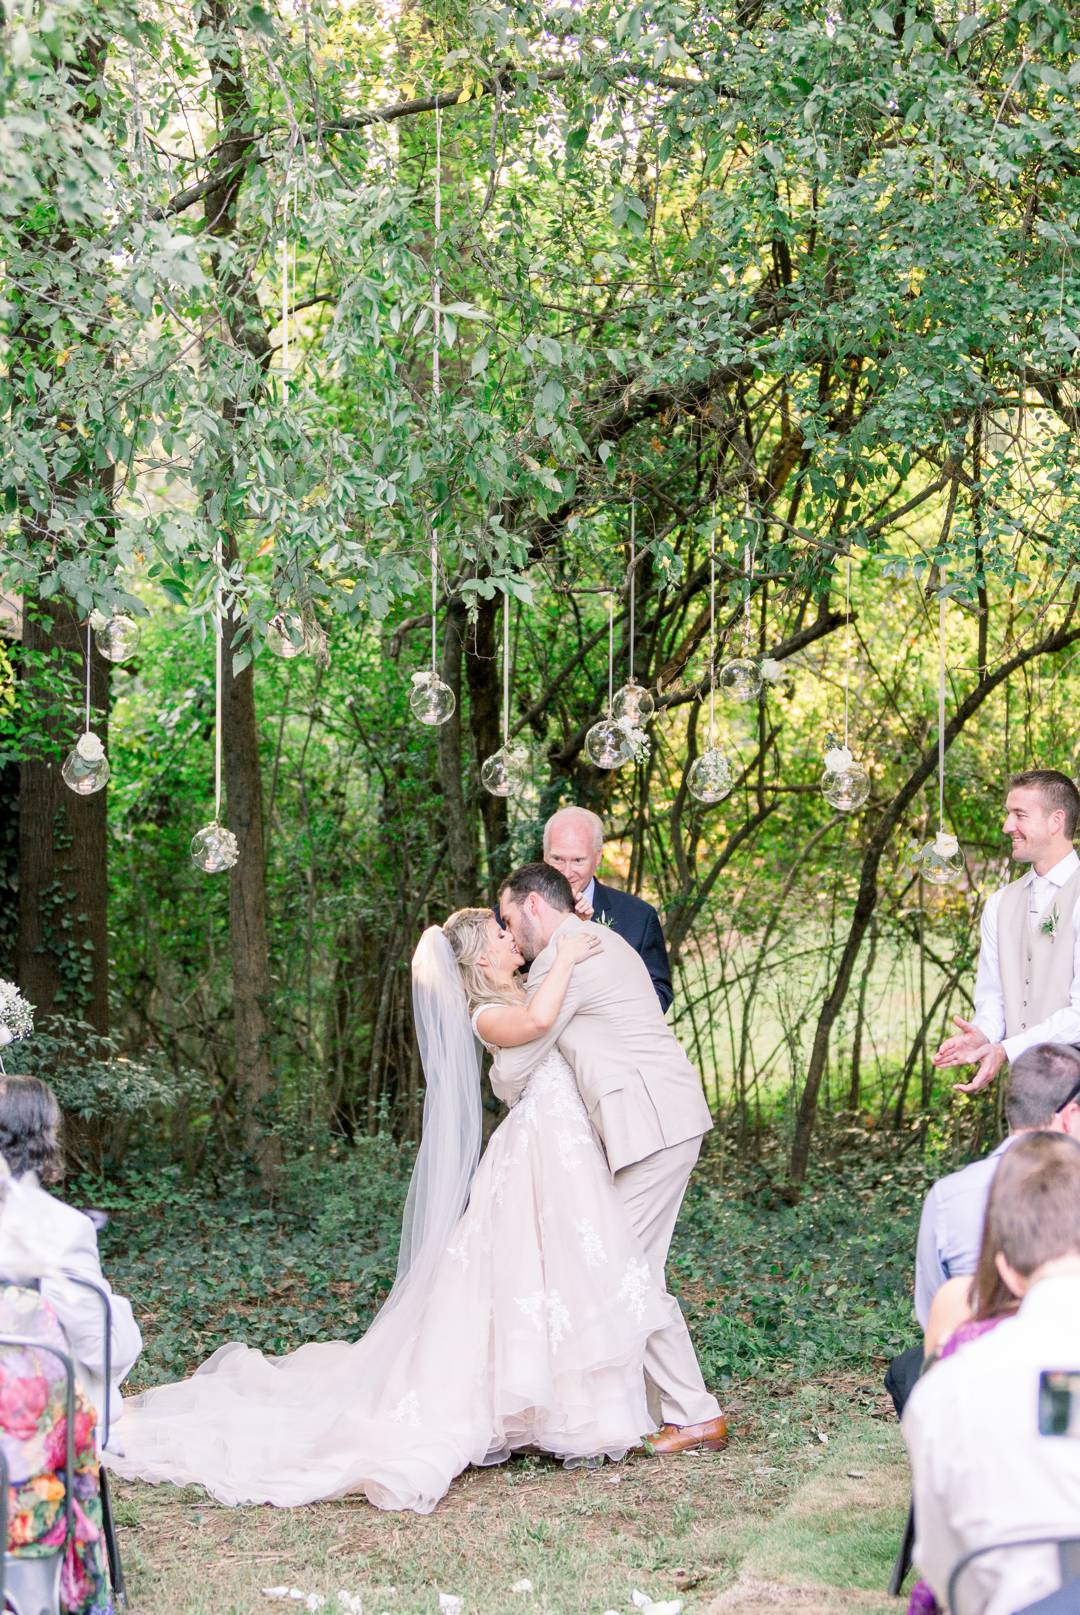 Bride and Groom get married at her childhood home in Alpharetta. Images by Leigh Wolfe Photography.